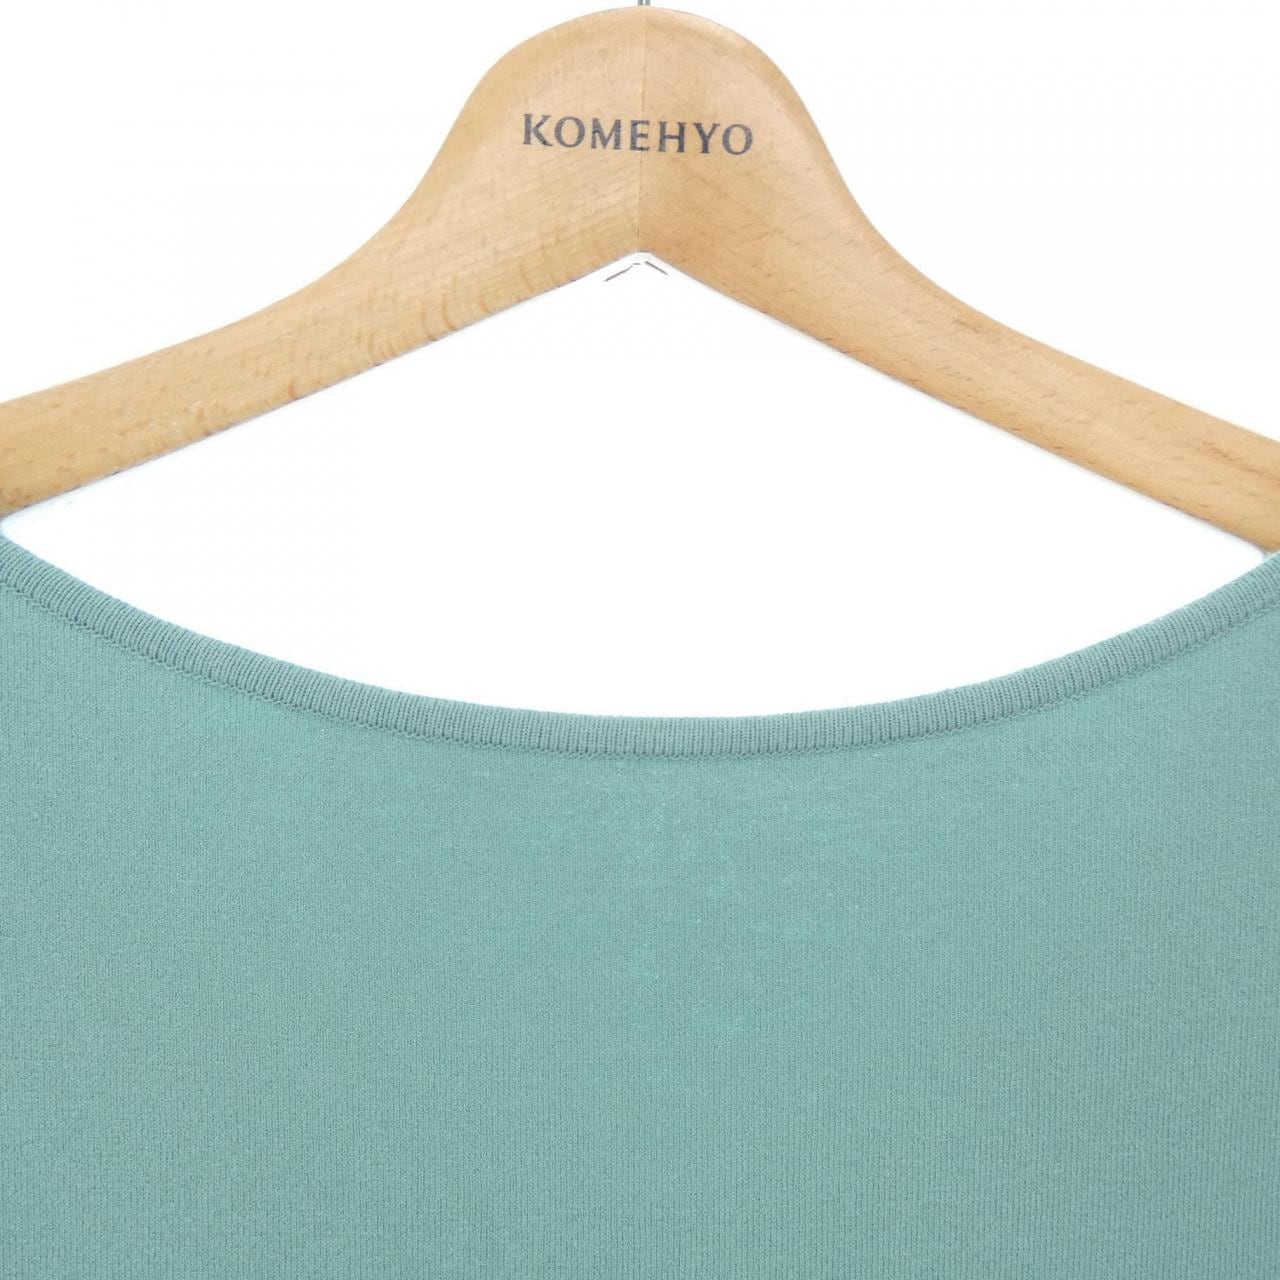 Foxy FOXEY top